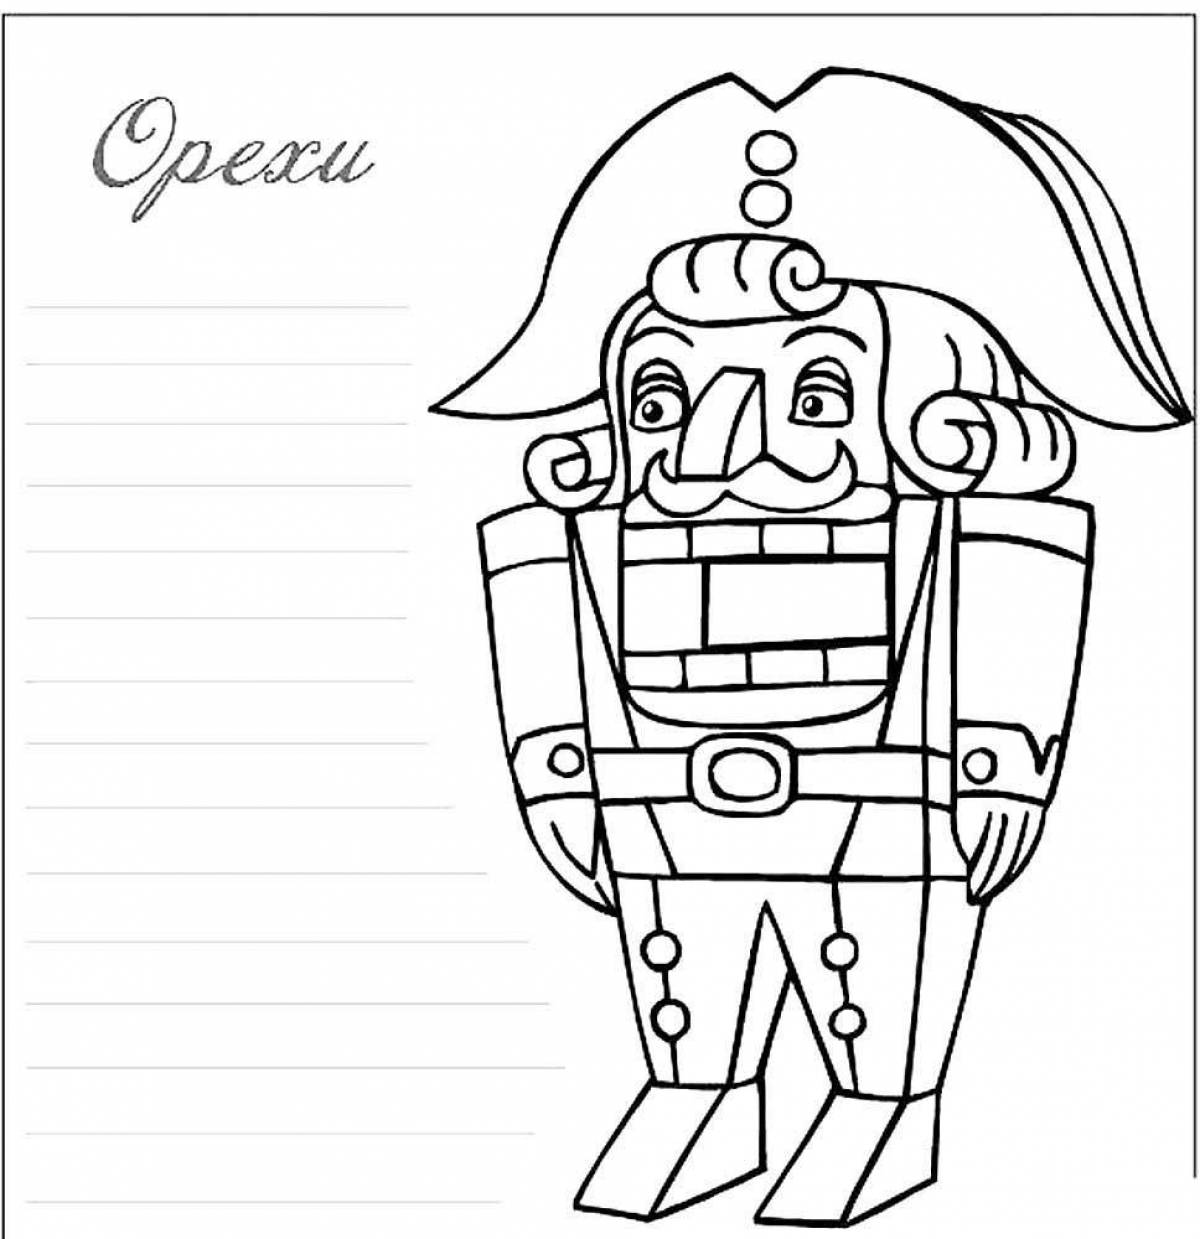 Playful nutcracker coloring page for kids